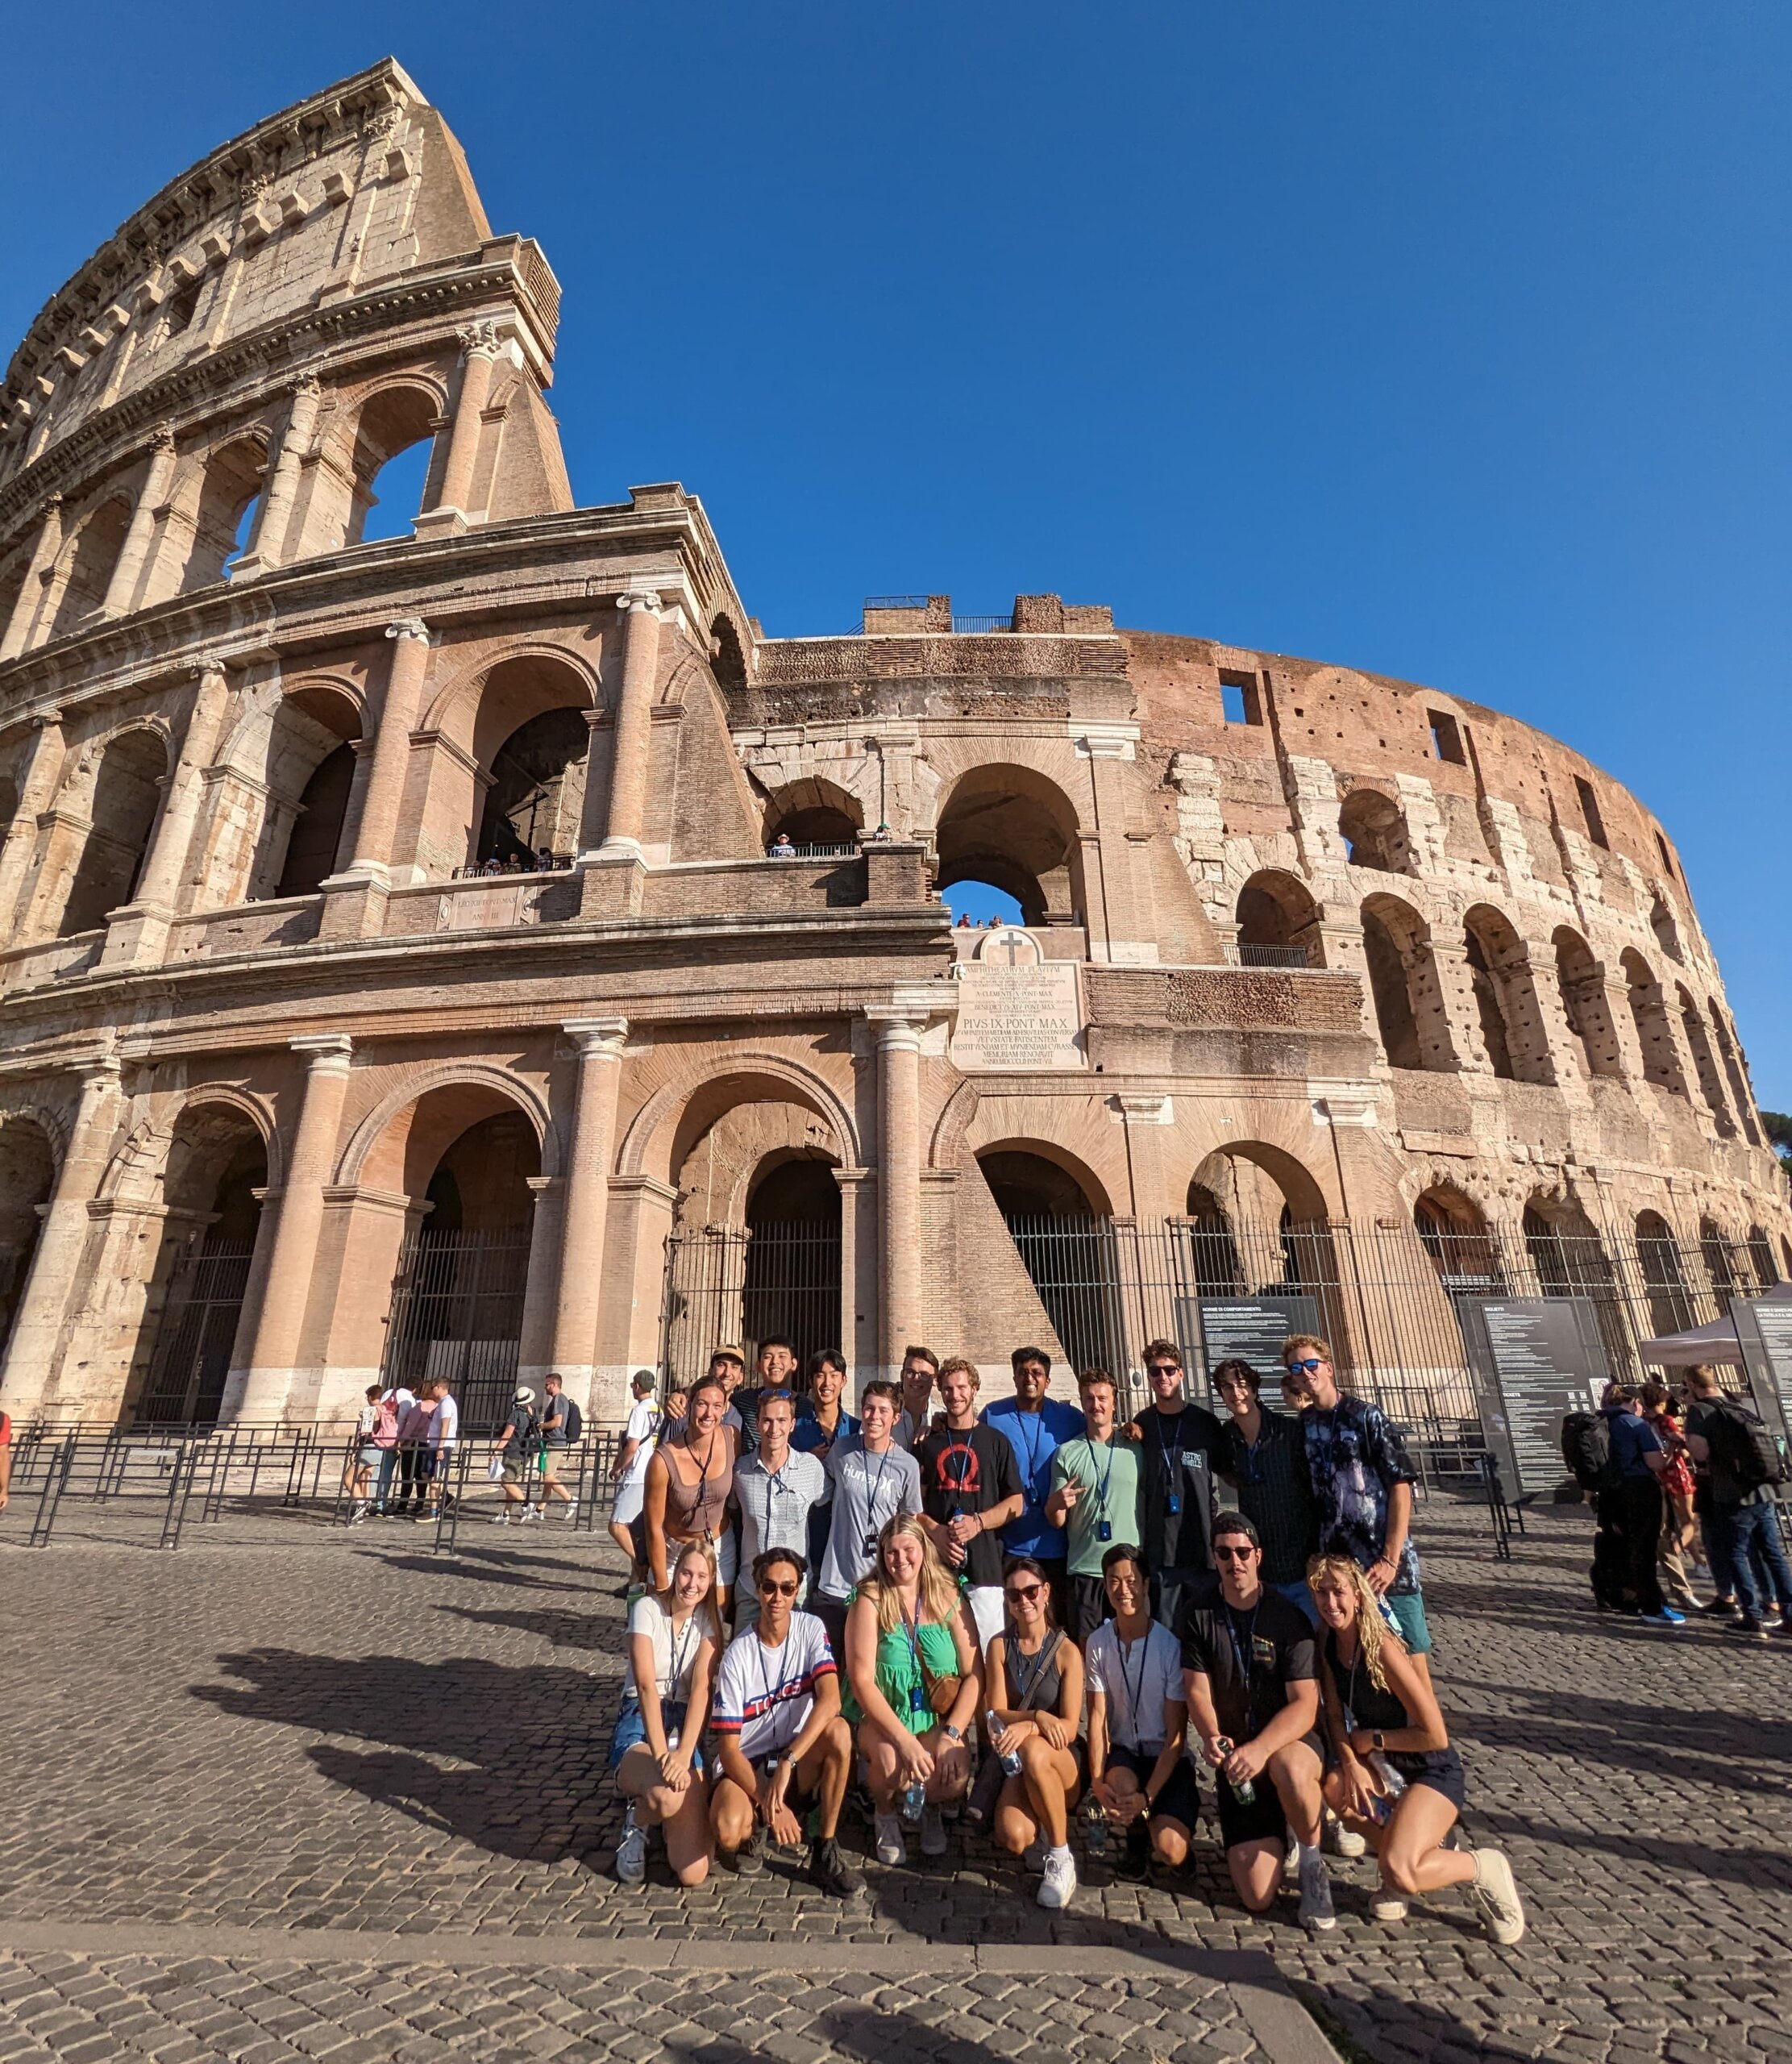 Students visit the Colosseum in Rome